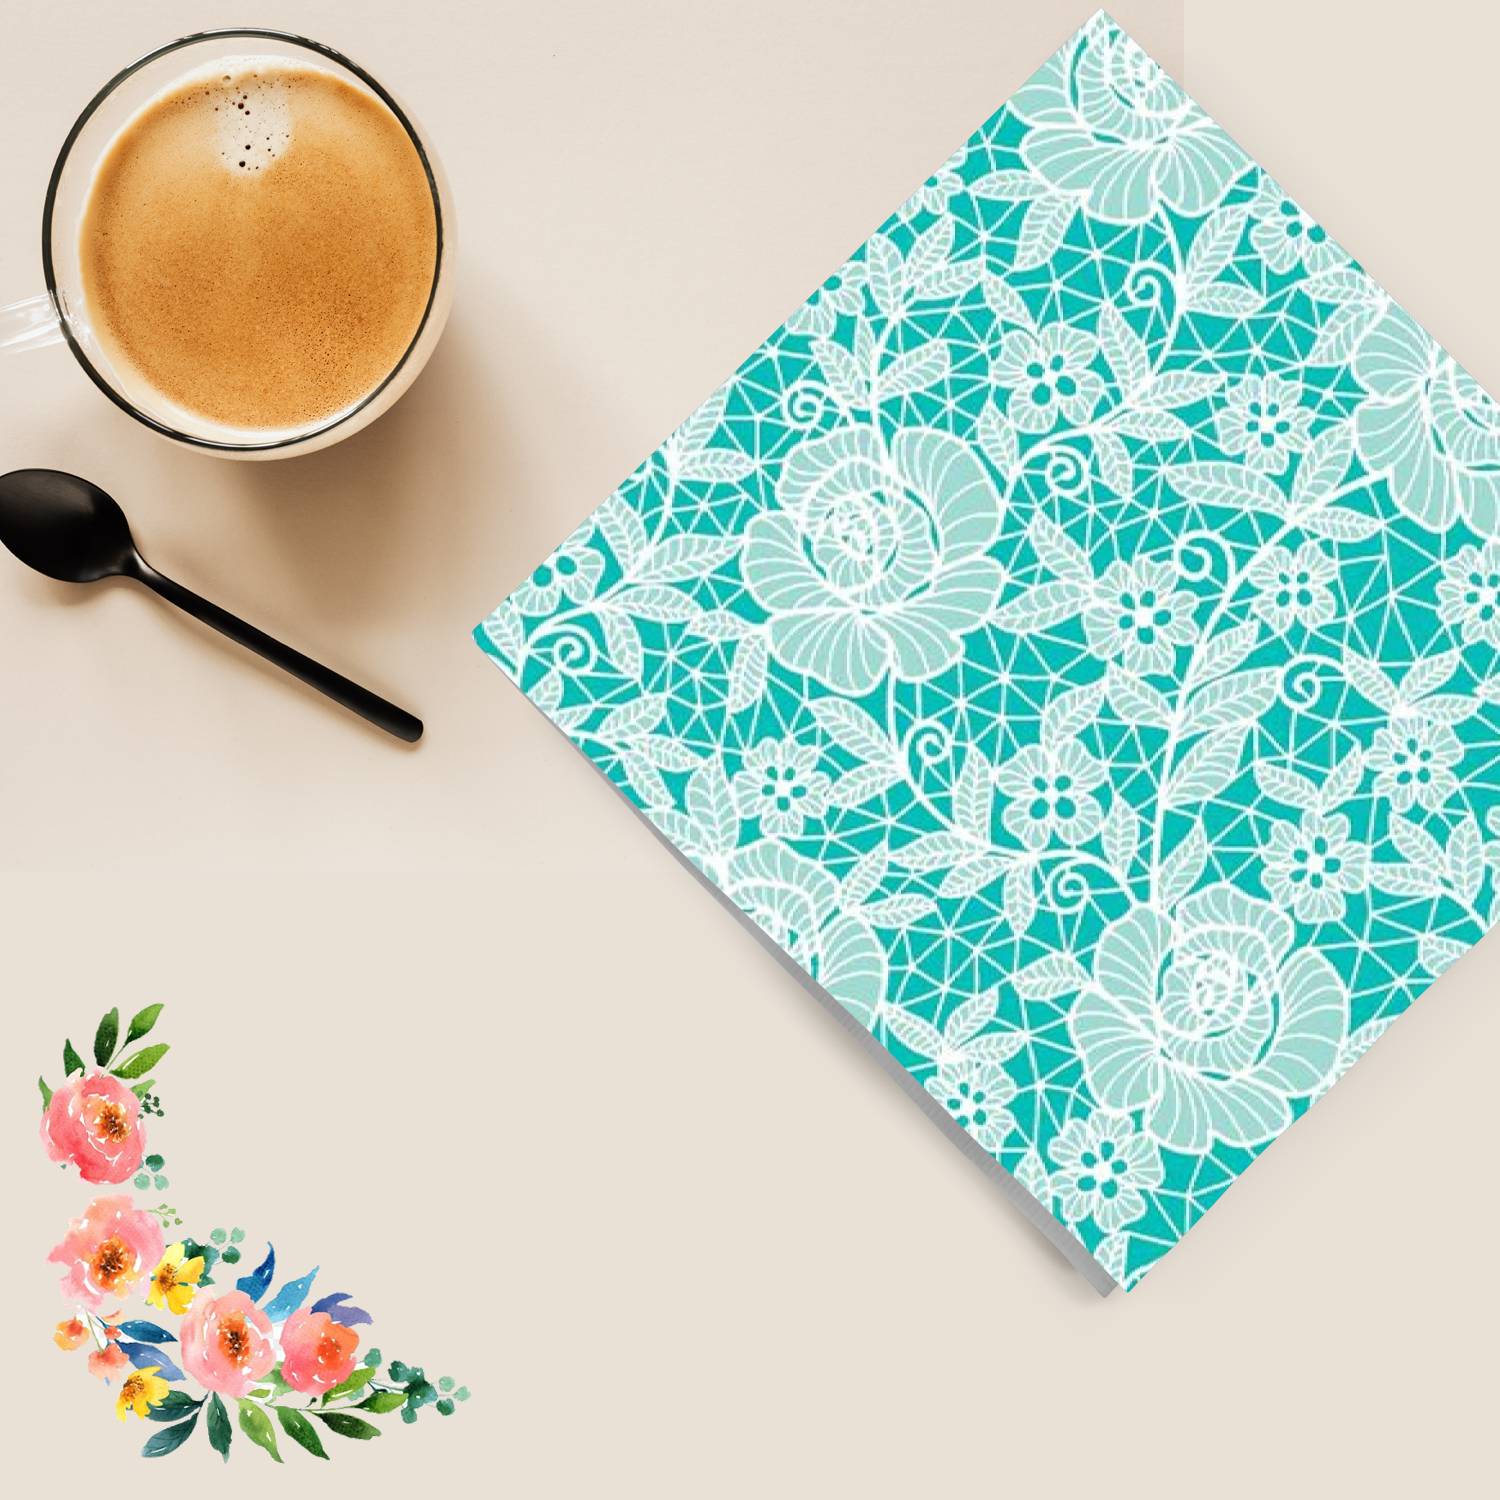 Blue Beauty Disposable Lunch Paper Napkins 20 Ct Tablesettings Nicole Fantini Collection   